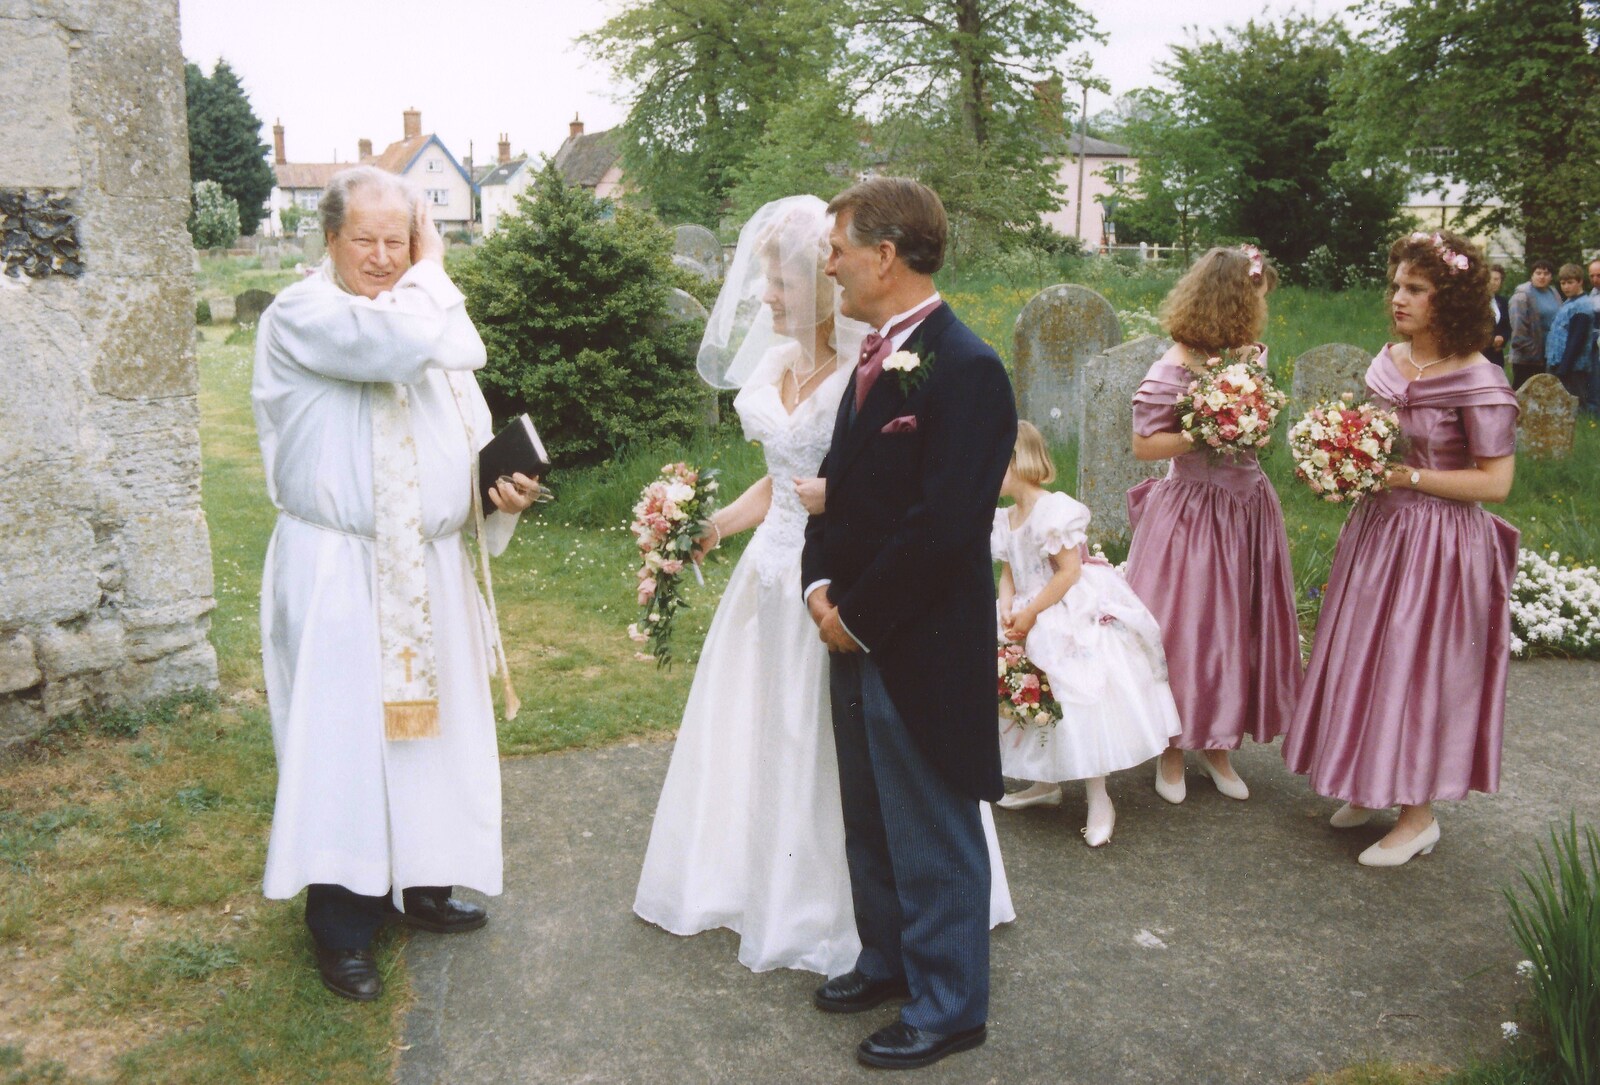 Bernie and Debbie wait with the vicar from Debbie's Wedding, Suffolk - 12th June 1999